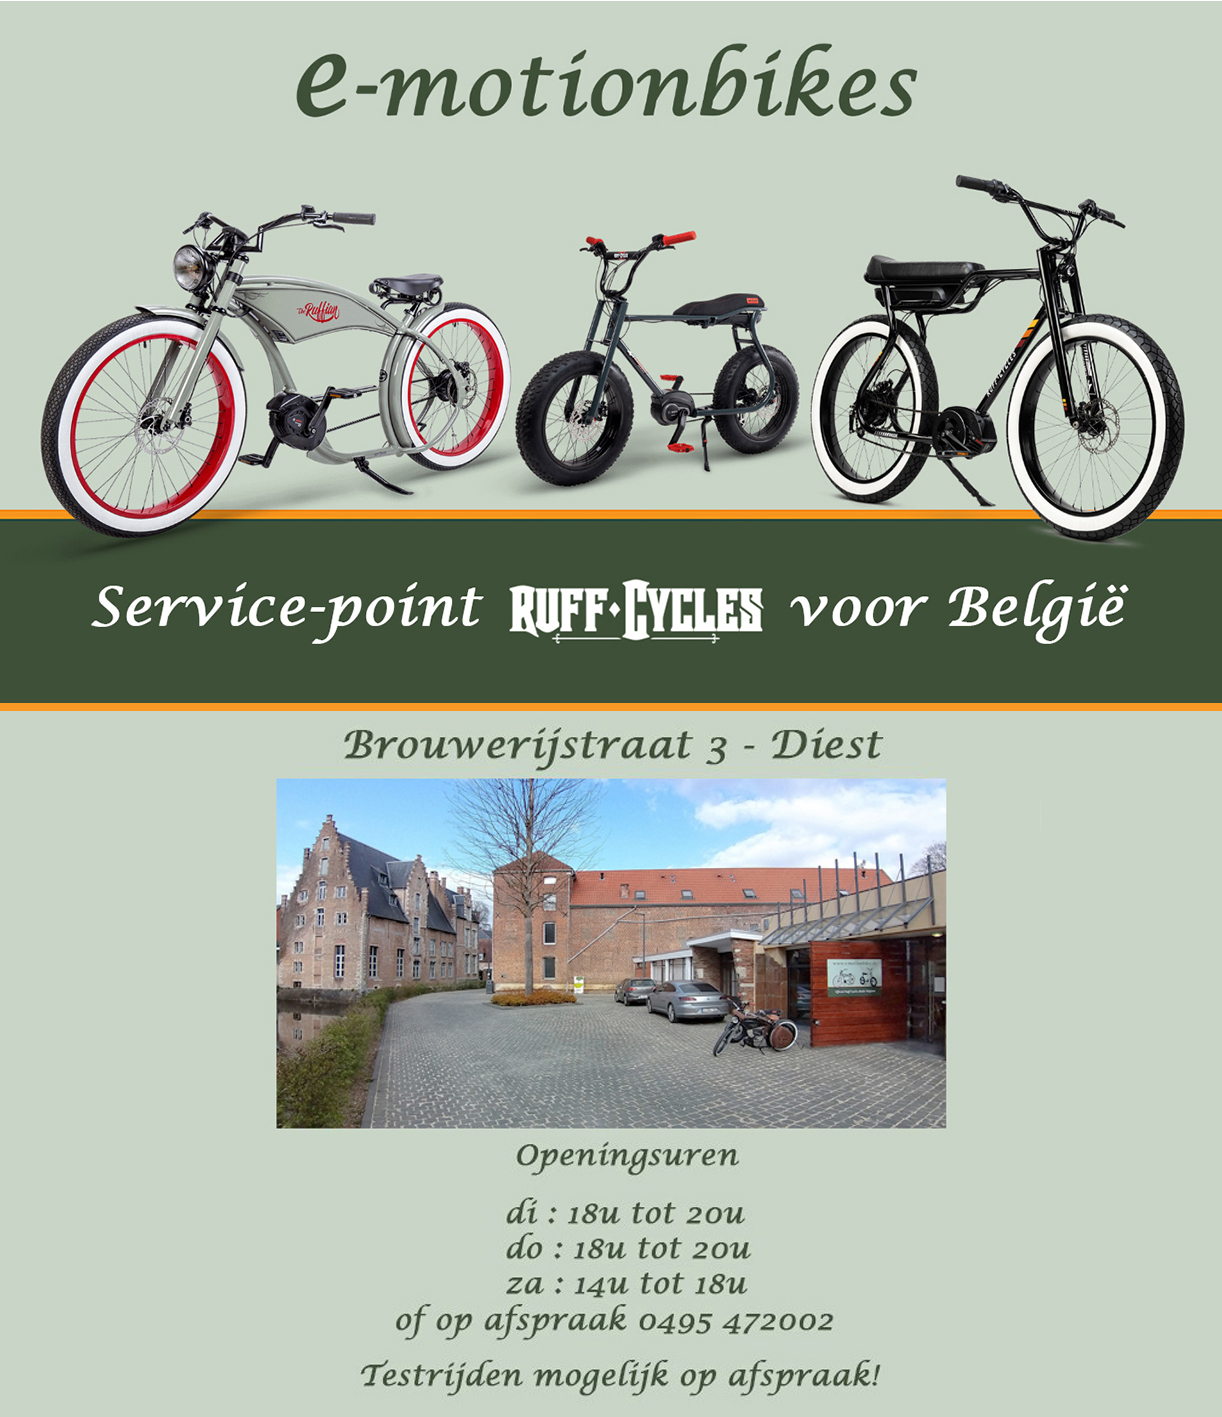 Contact E-motionbikes openingsuren Service-point Ruff Cycles in België